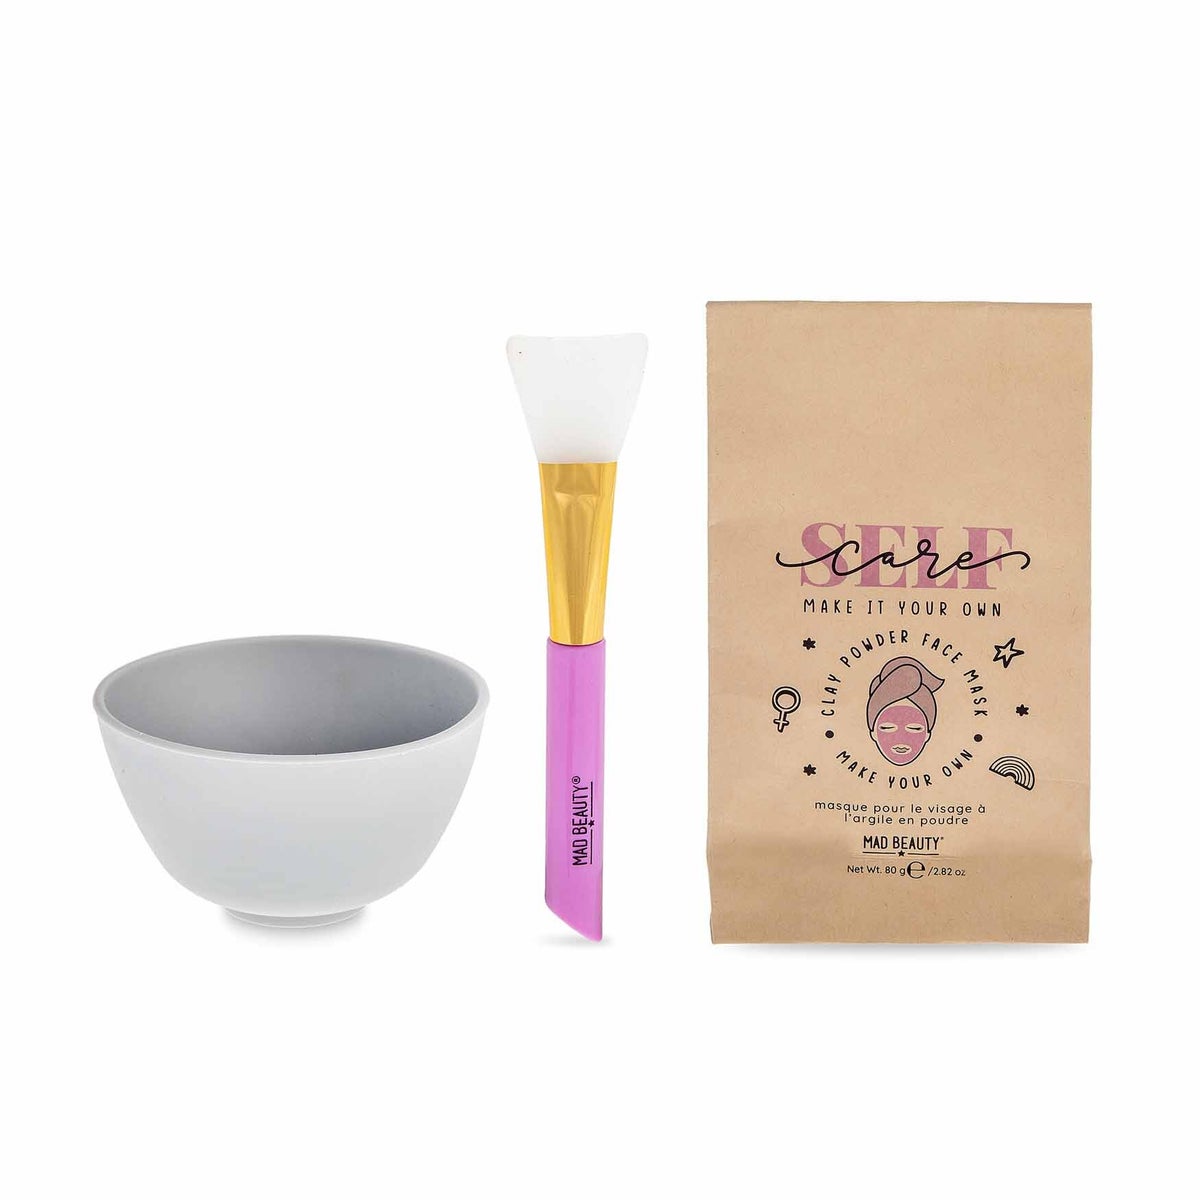 Make It Your Own - Face Mask Kit